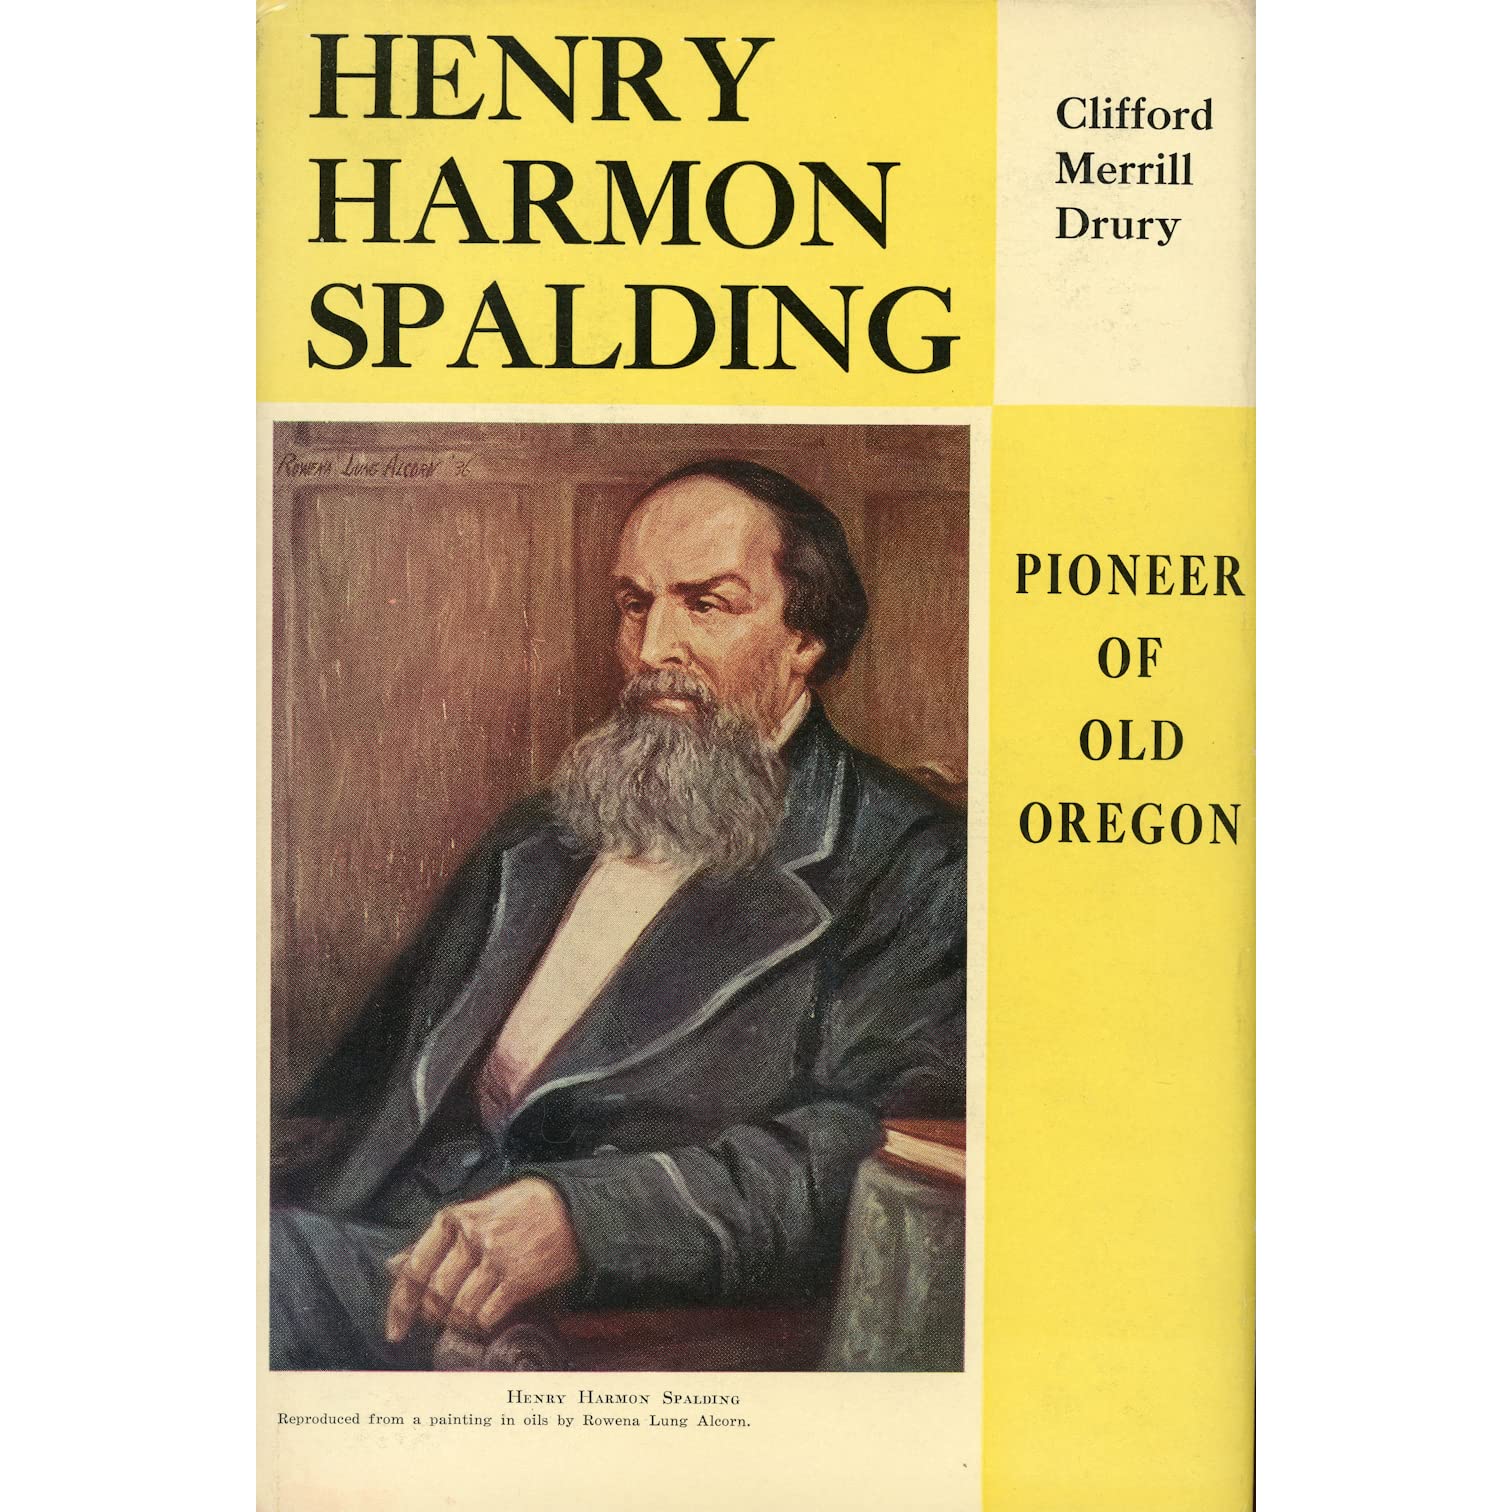 Pioneer of old Oregon: Henry Harmon Spalding (book cover)